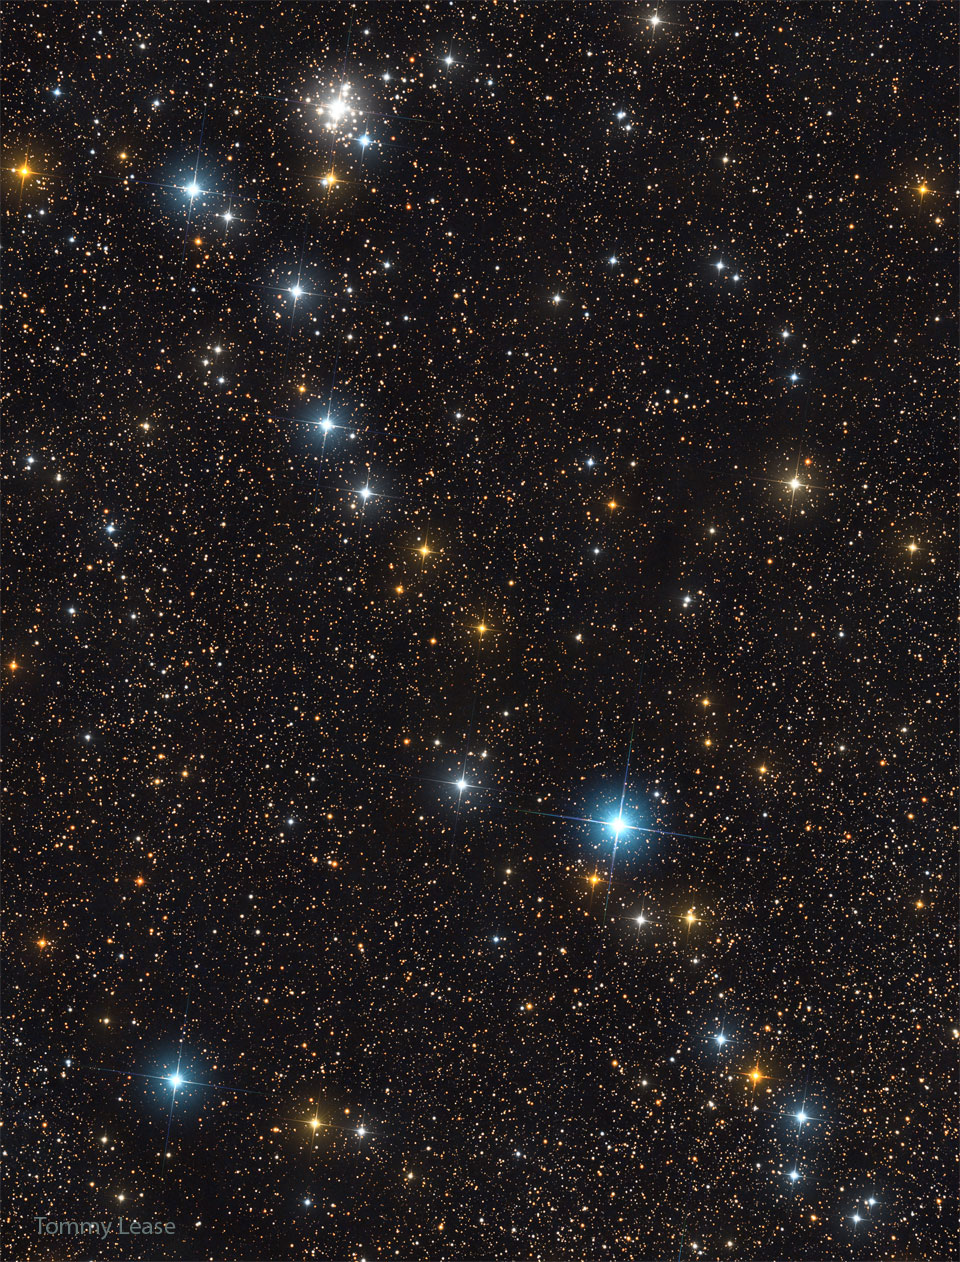 The featured image shows a line of bright stars strewn diagonally
across a starfield of more dim stars. A cluster of stars is also visible
near the top left of the image. 
Please see the explanation for more detailed information.